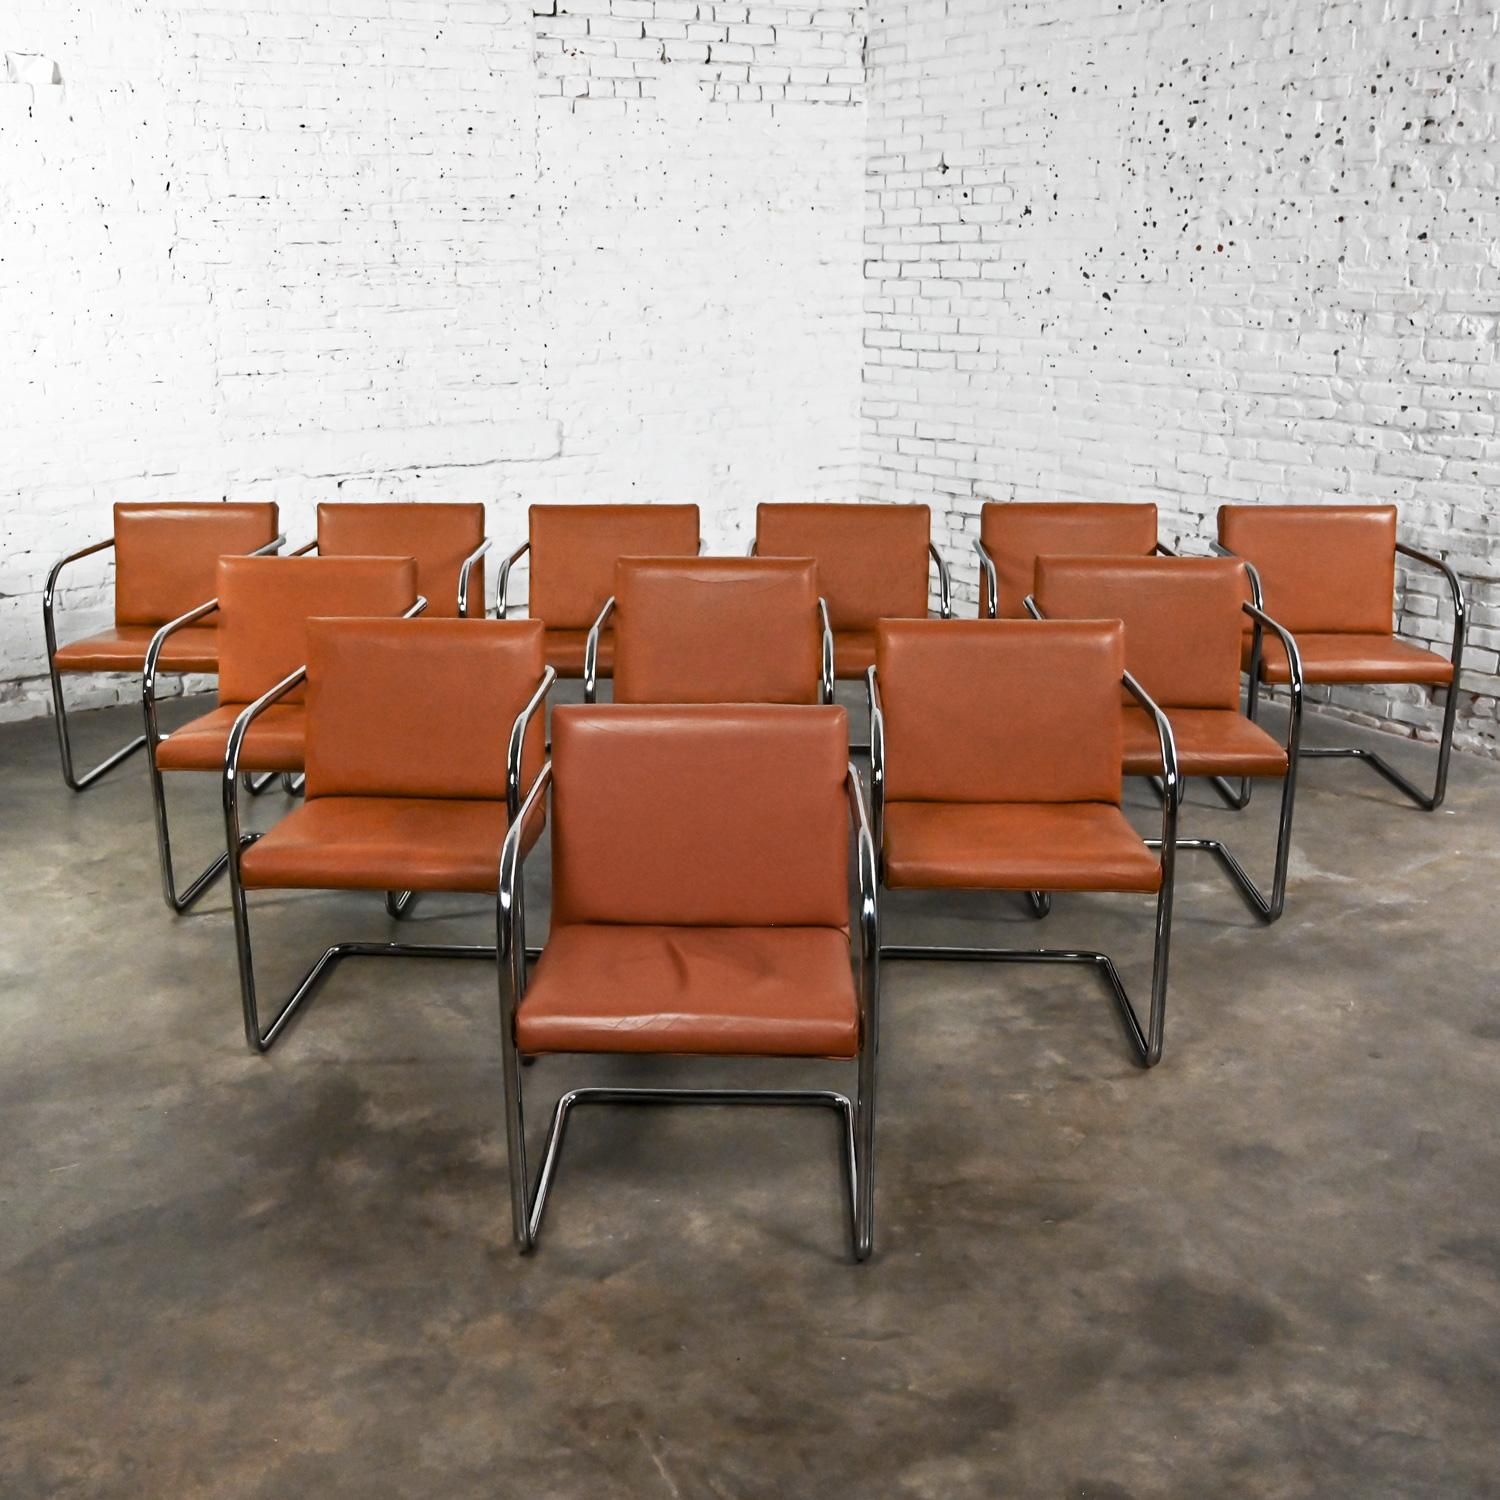 Thonet Bauhaus Brno Style Chairs Chrome & Cognac Leather Cantilever Set of 12  For Sale 15